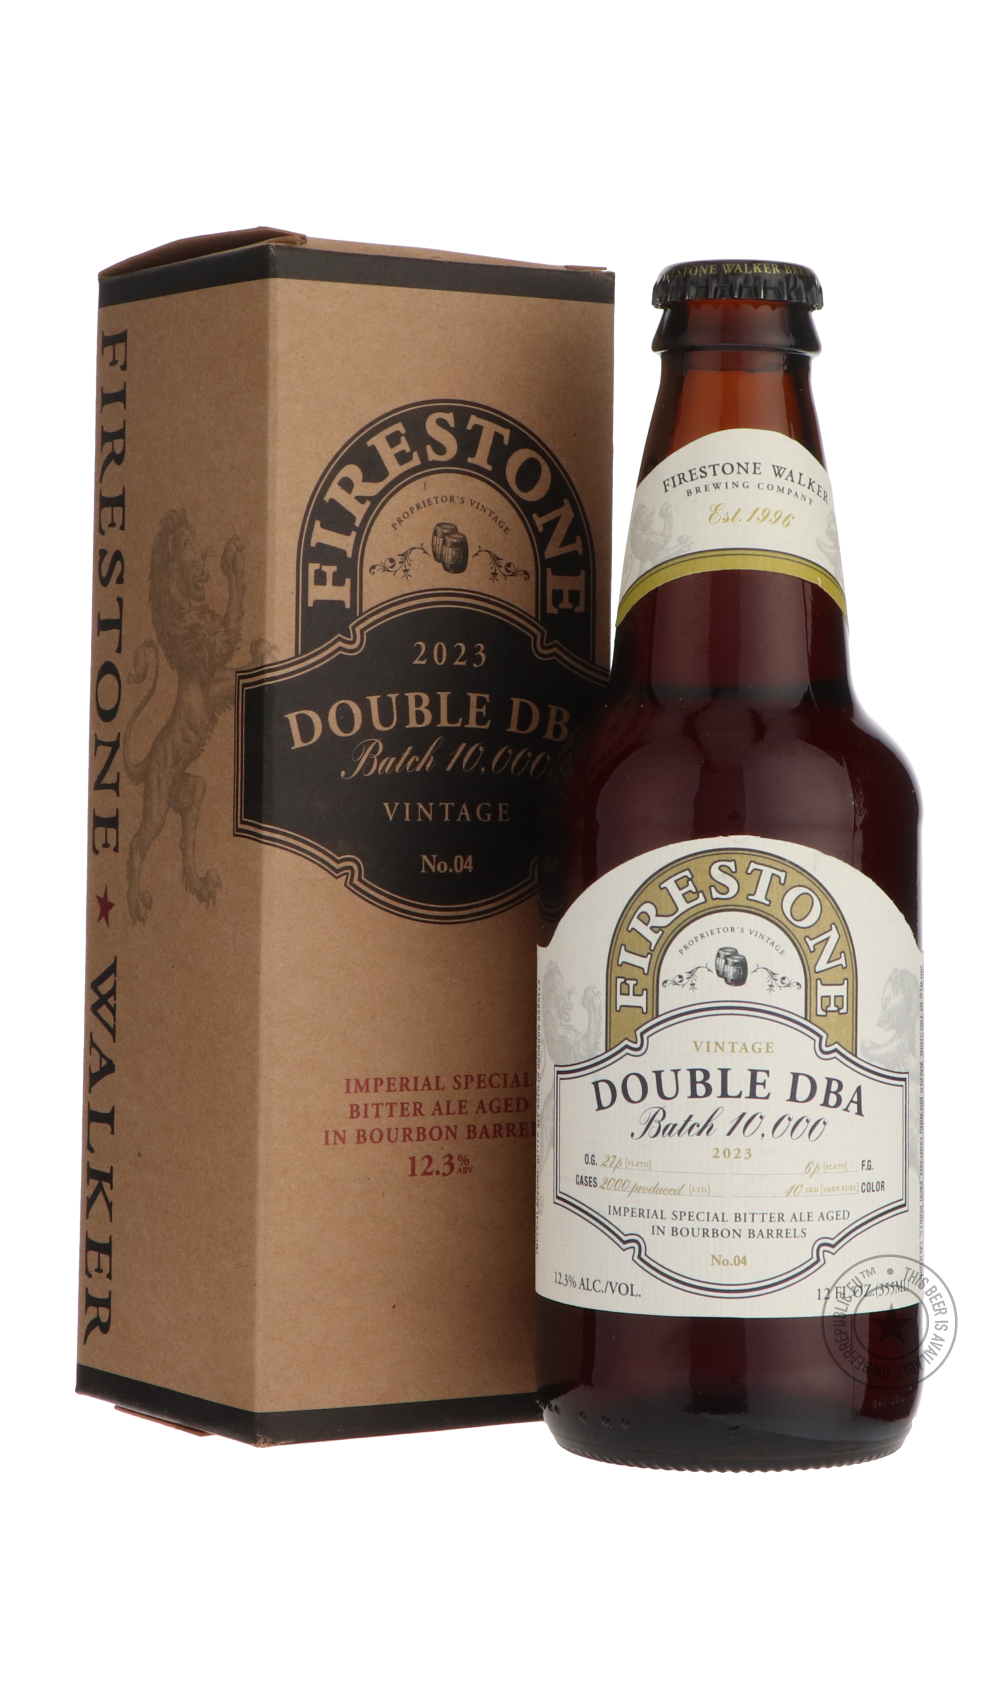 -Firestone Walker- Double DBA - Batch 10,000-Brown & Dark- Only @ Beer Republic - The best online beer store for American & Canadian craft beer - Buy beer online from the USA and Canada - Bier online kopen - Amerikaans bier kopen - Craft beer store - Craft beer kopen - Amerikanisch bier kaufen - Bier online kaufen - Acheter biere online - IPA - Stout - Porter - New England IPA - Hazy IPA - Imperial Stout - Barrel Aged - Barrel Aged Imperial Stout - Brown - Dark beer - Blond - Blonde - Pilsner - Lager - Whea